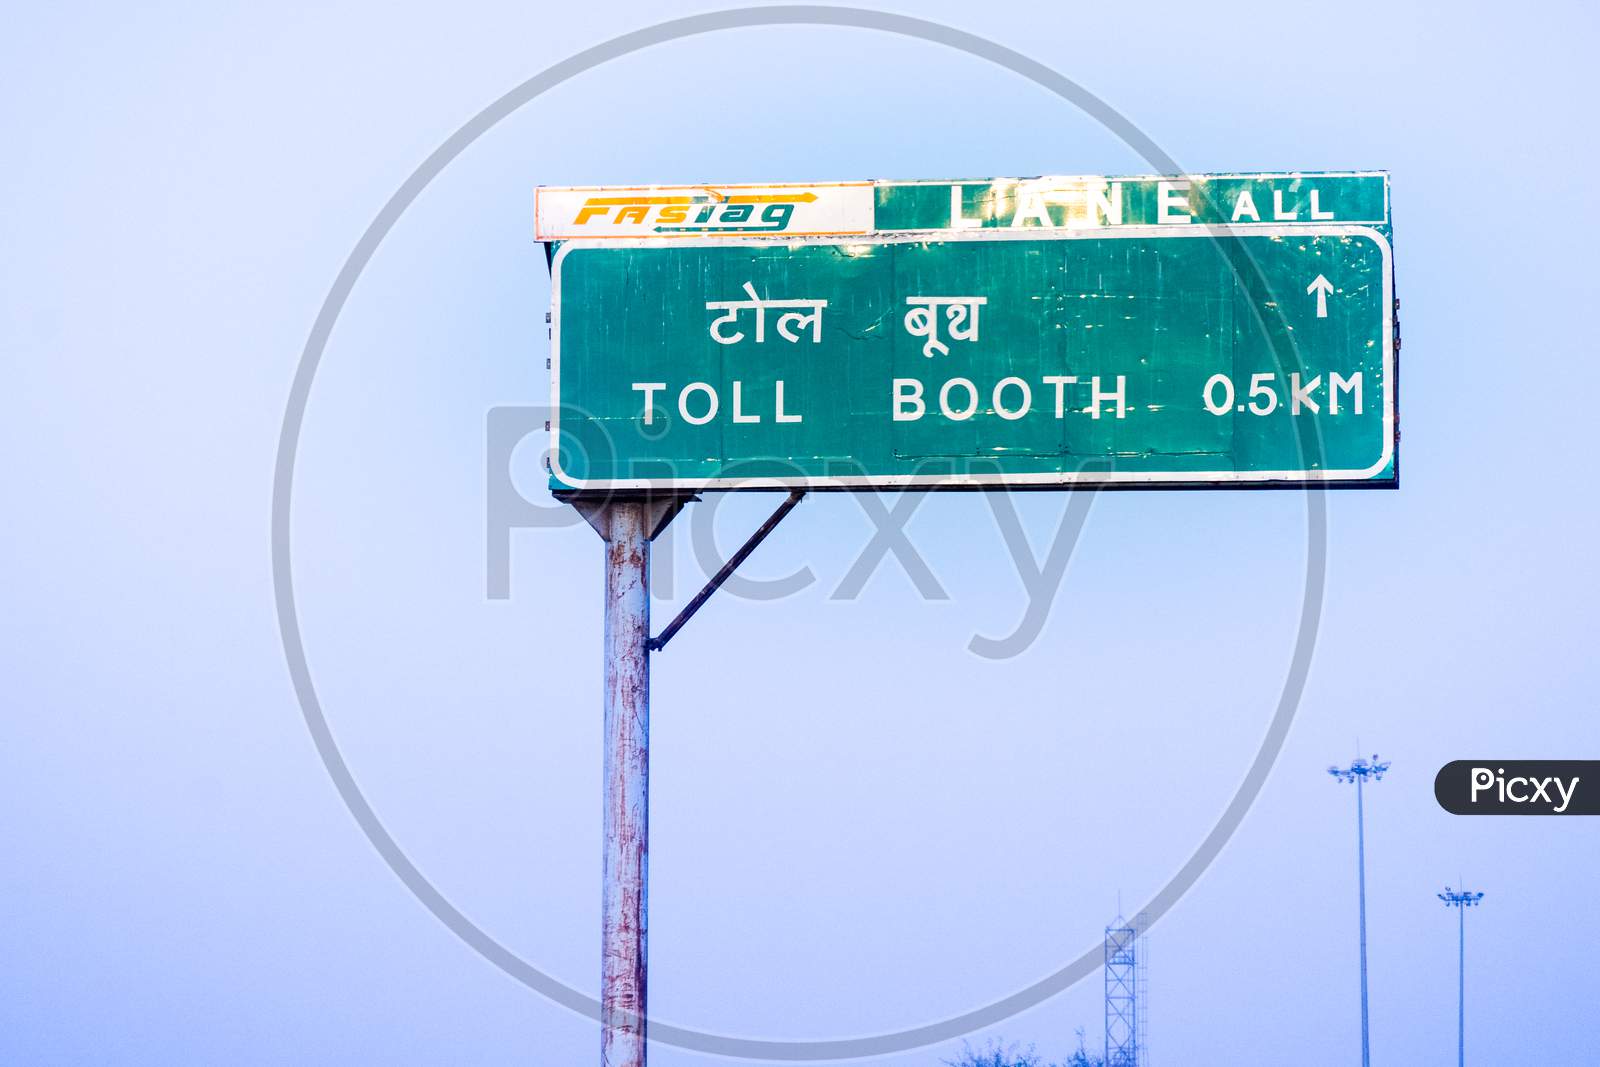 Toll Booth Sign Near A Toll Booth Showing The New Cashless Rfid Based Fastag Payment System Made Mandatory By The National Highway Authority Of India Nhai To Speed Payments And Reduce Congestion On Highways